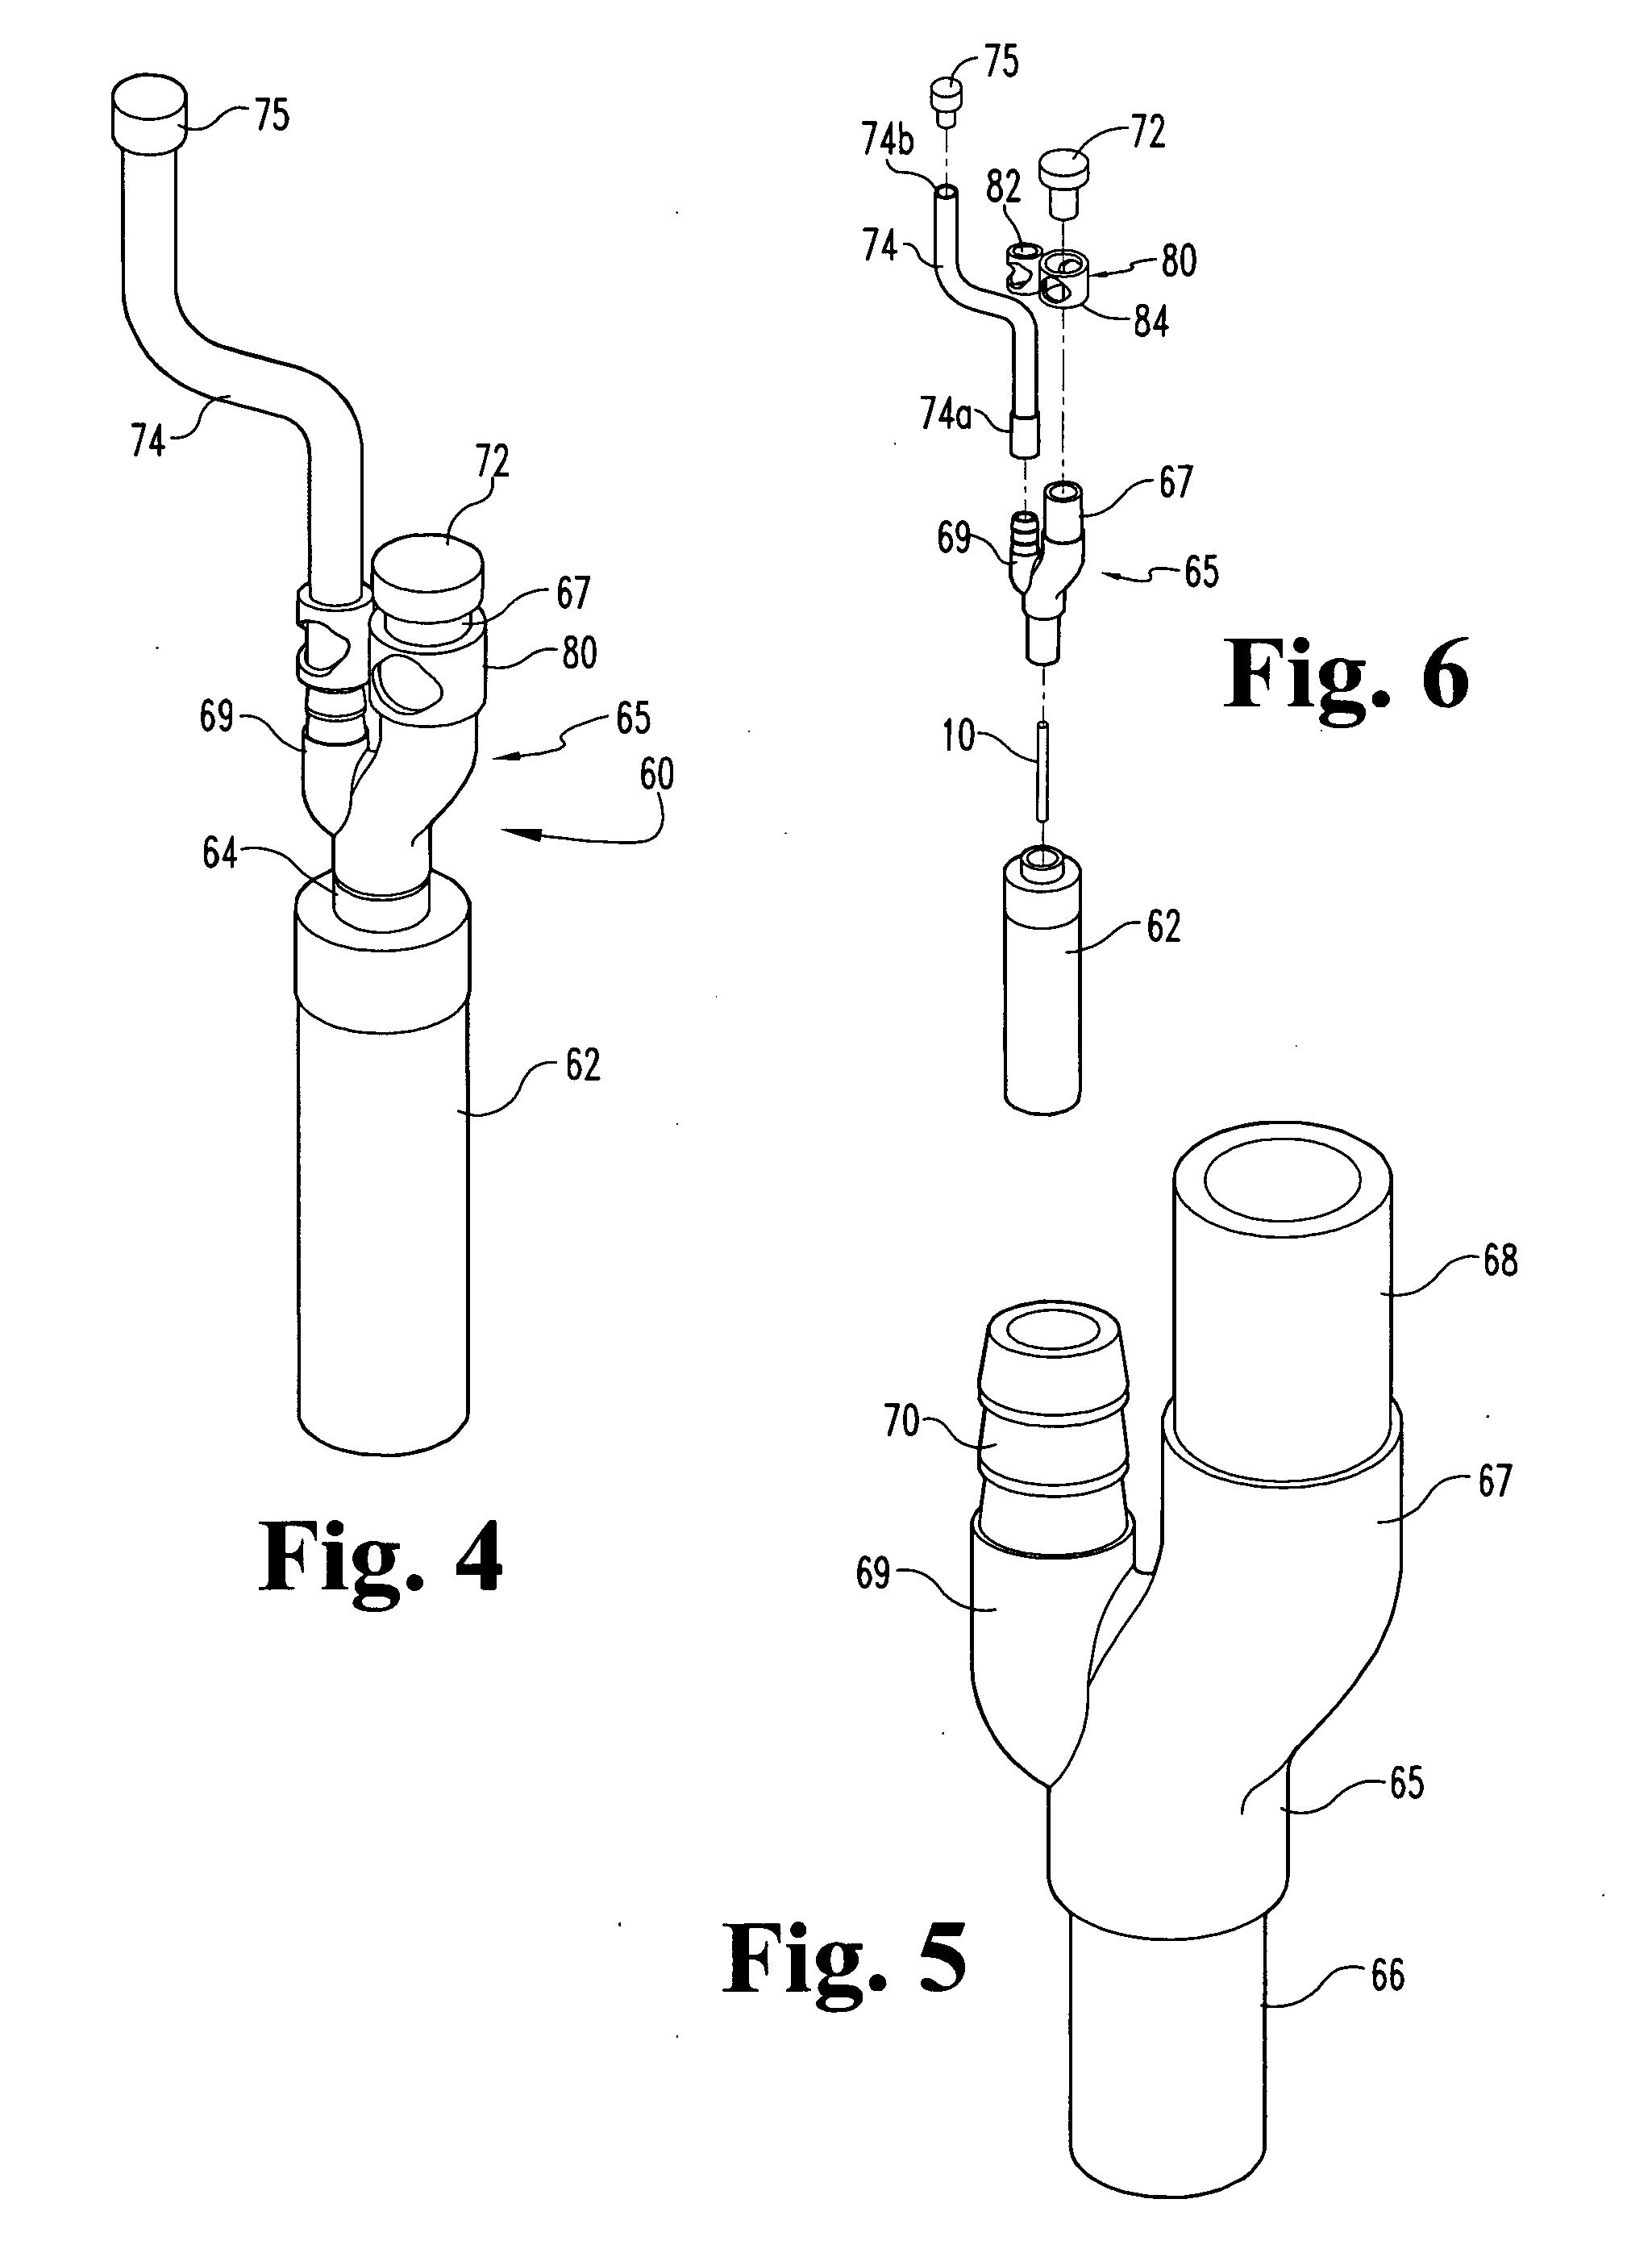 Systems and Methods for Cryopreservation of Cells